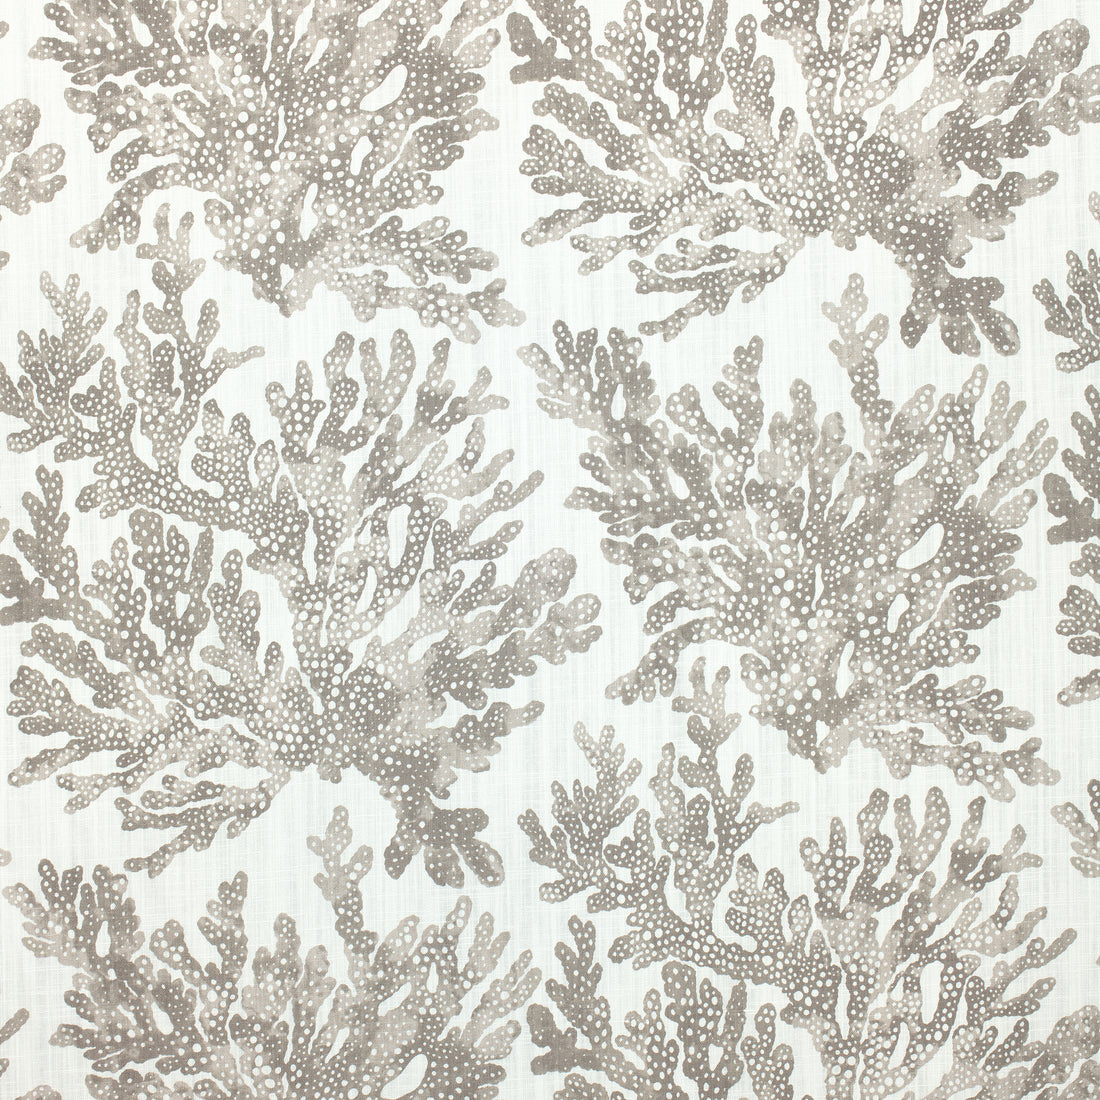 Marine Coral fabric in beige color - pattern number F910140 - by Thibaut in the Tropics collection